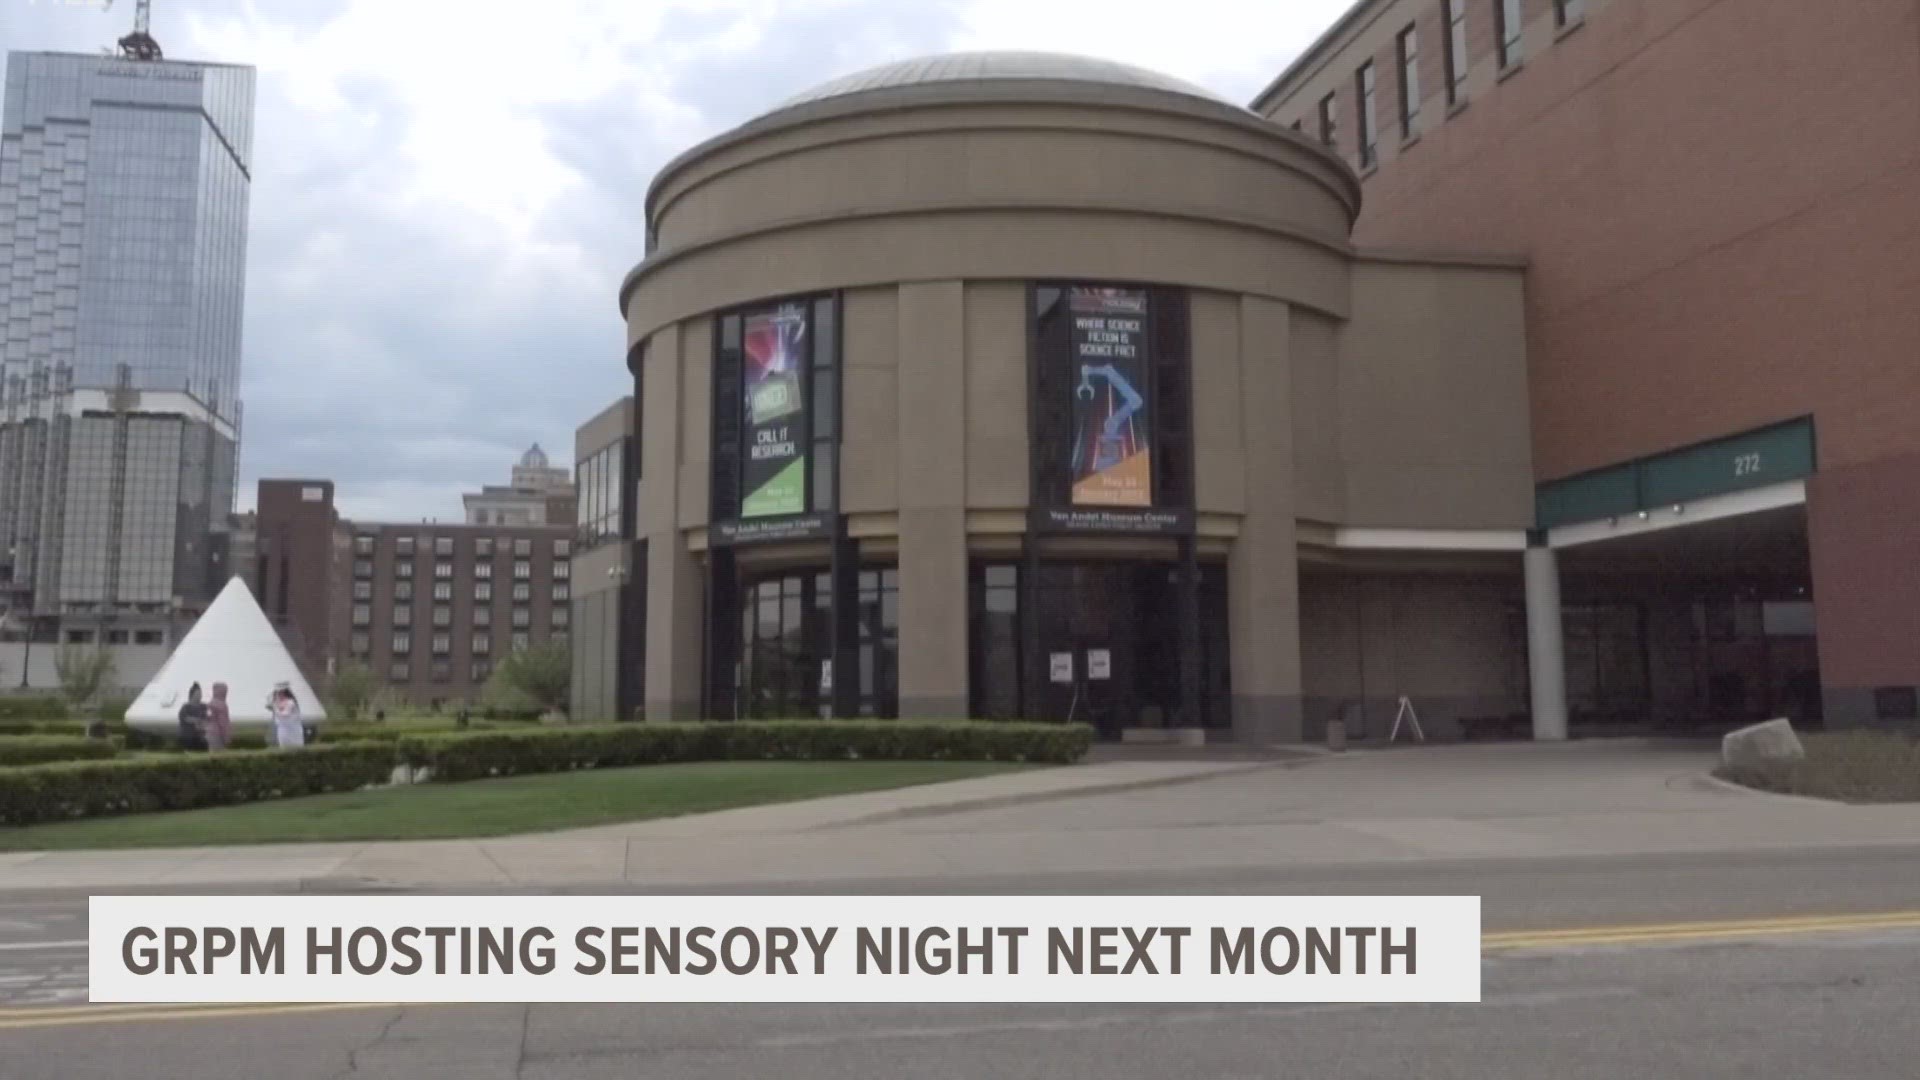 The museum will adapt sounds, lighting and activities to create a low-sensory experience. There will also be a low-sensory planetarium showing.